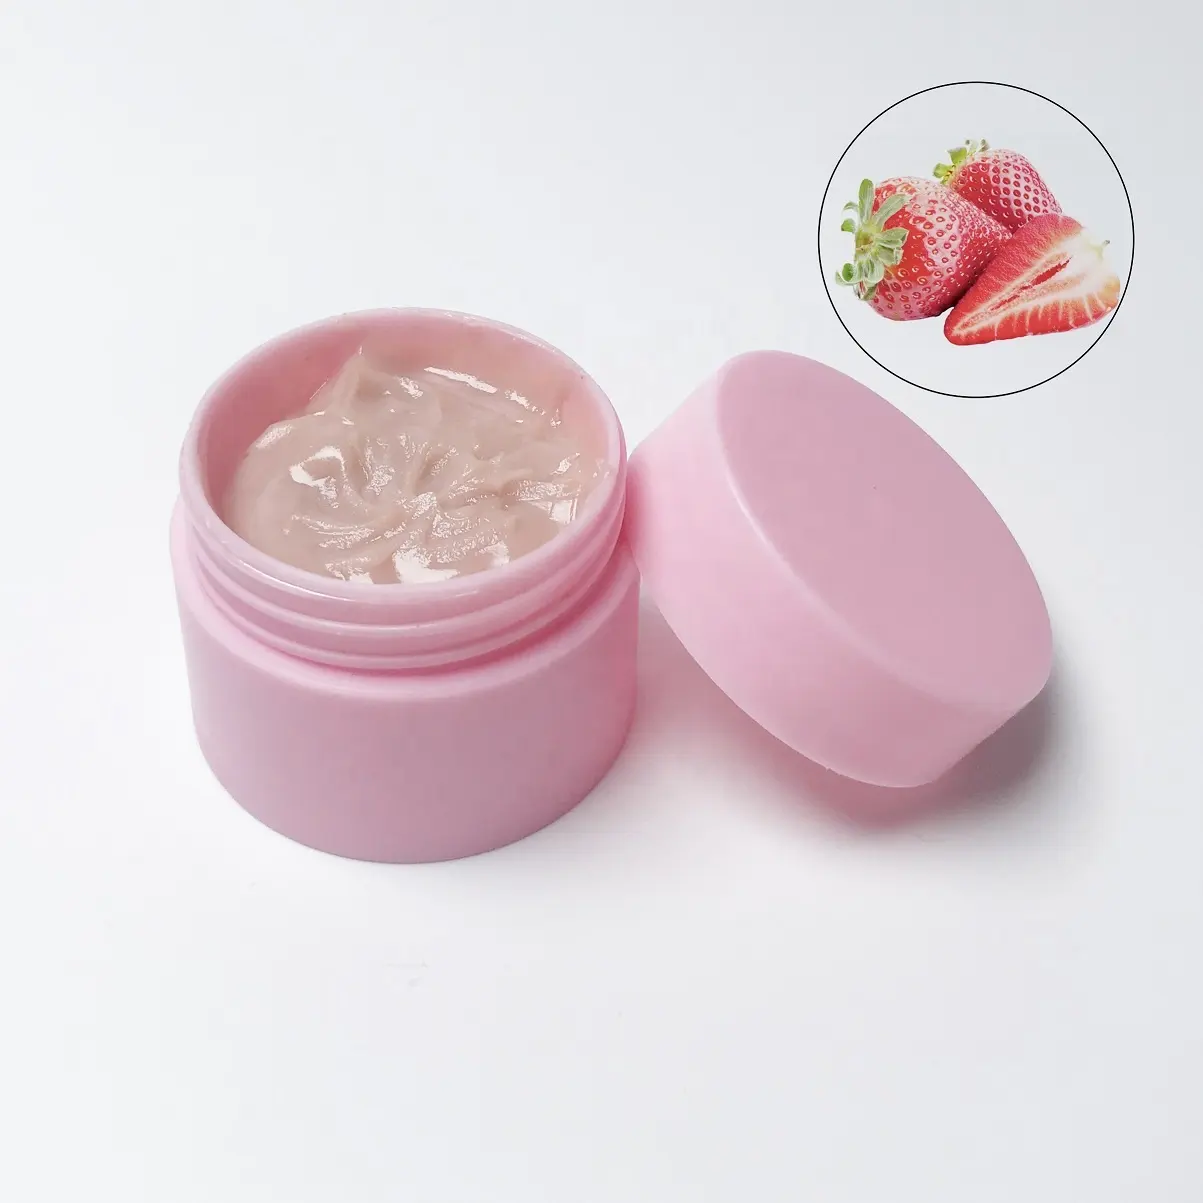 Private Label Eyelash Glue Remover Strawberry Scented Cream Type Remover For Eyelash Extensions